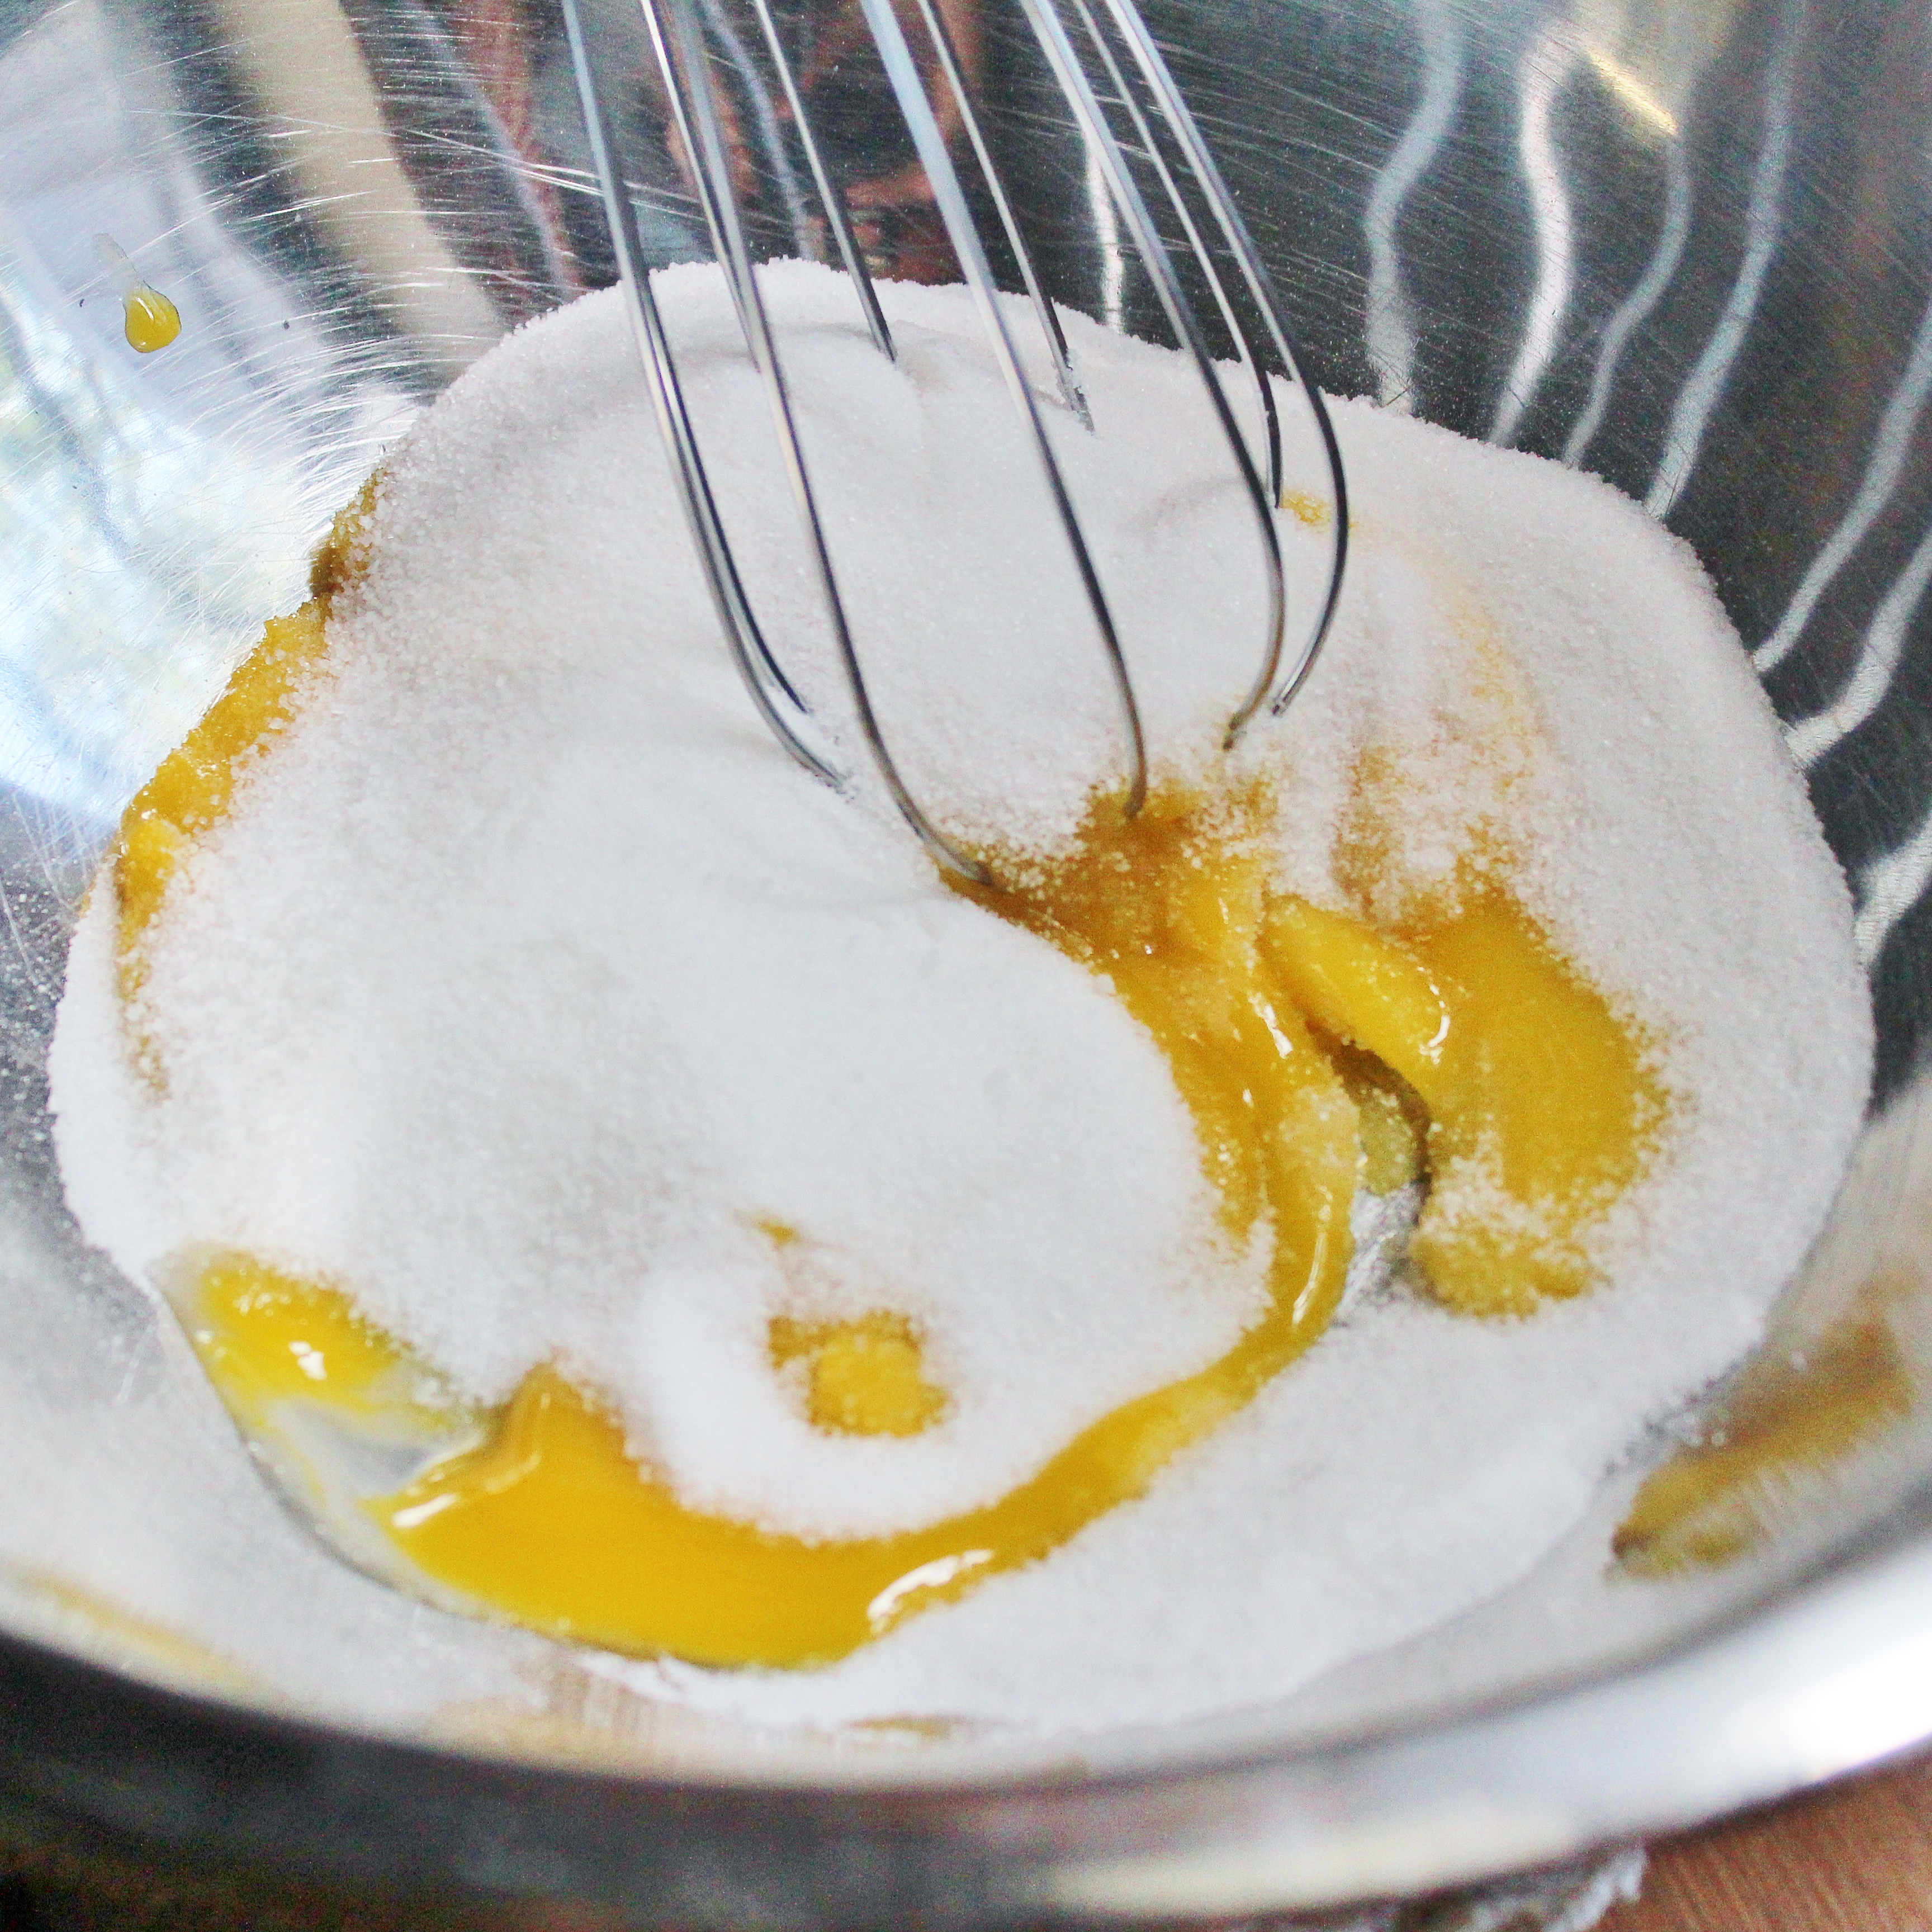 mixing the sugar and eggs